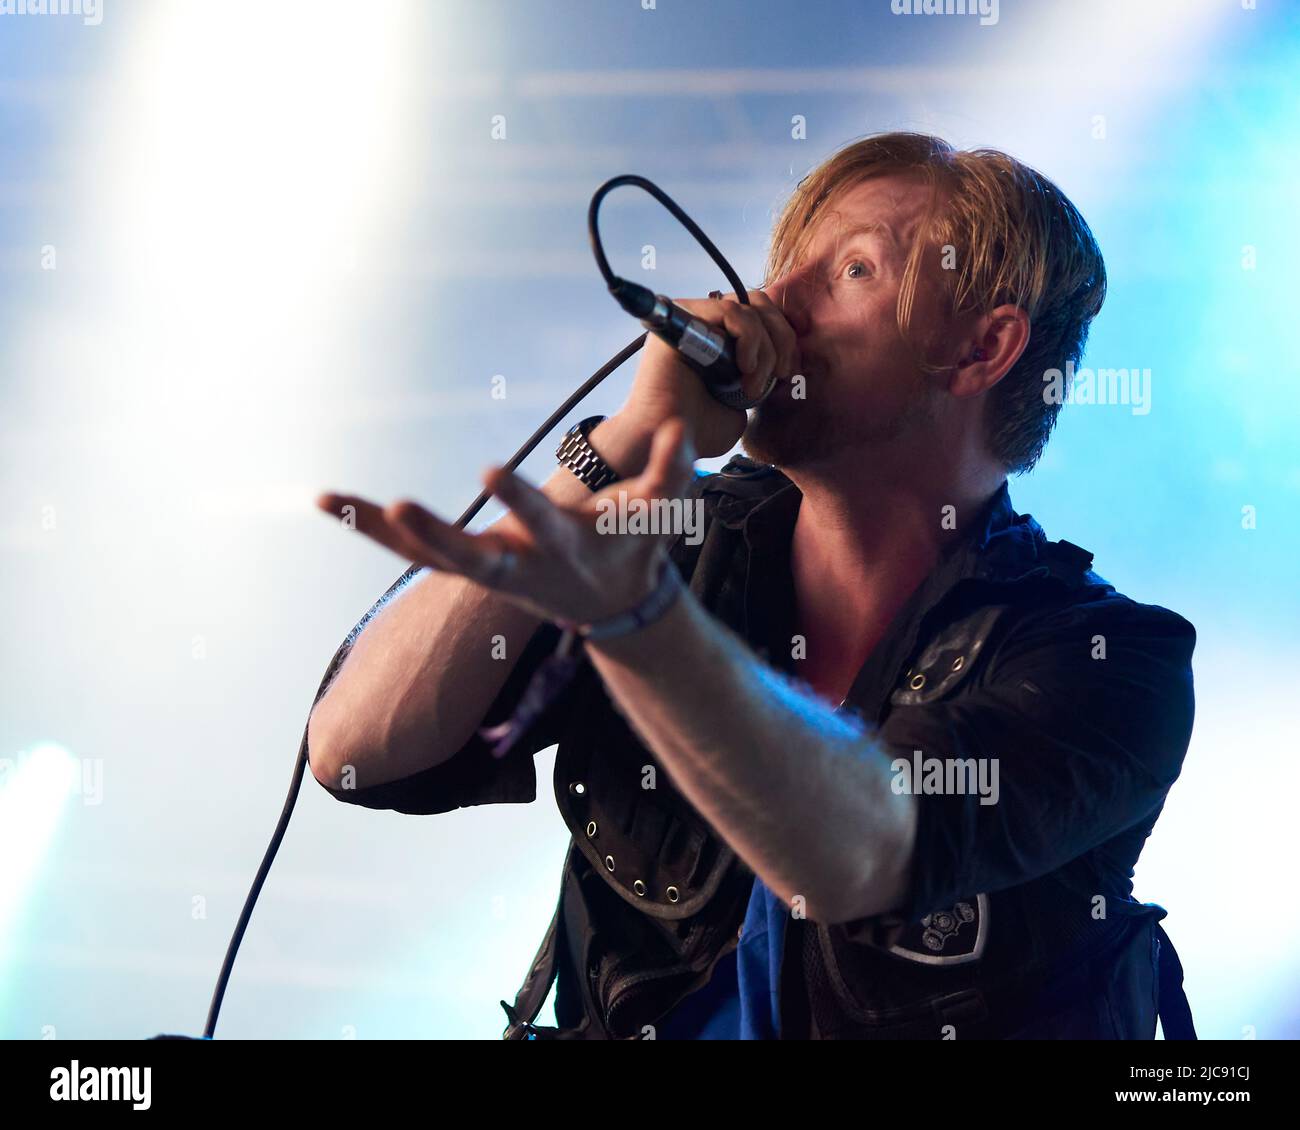 Def Con One Performs at Bloodstock Festival, Catton Park Derbyshire, UK. 09 Aug 2019. Credit: Will Tudor/Alamy Stock Photo